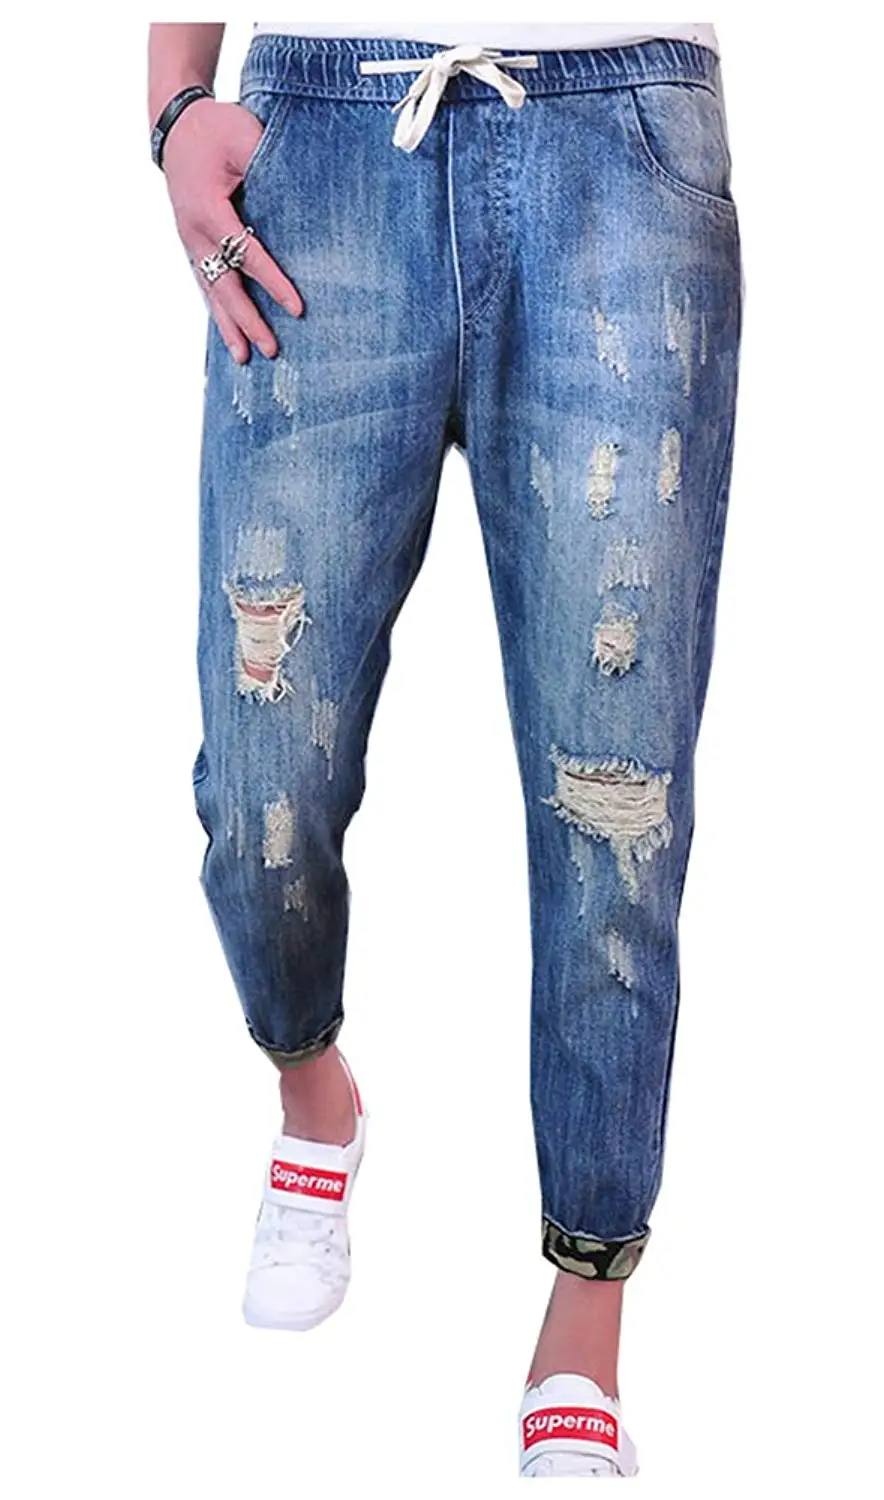 Cheap Open Crotch Jeans, find Open Crotch Jeans deals on line at ...